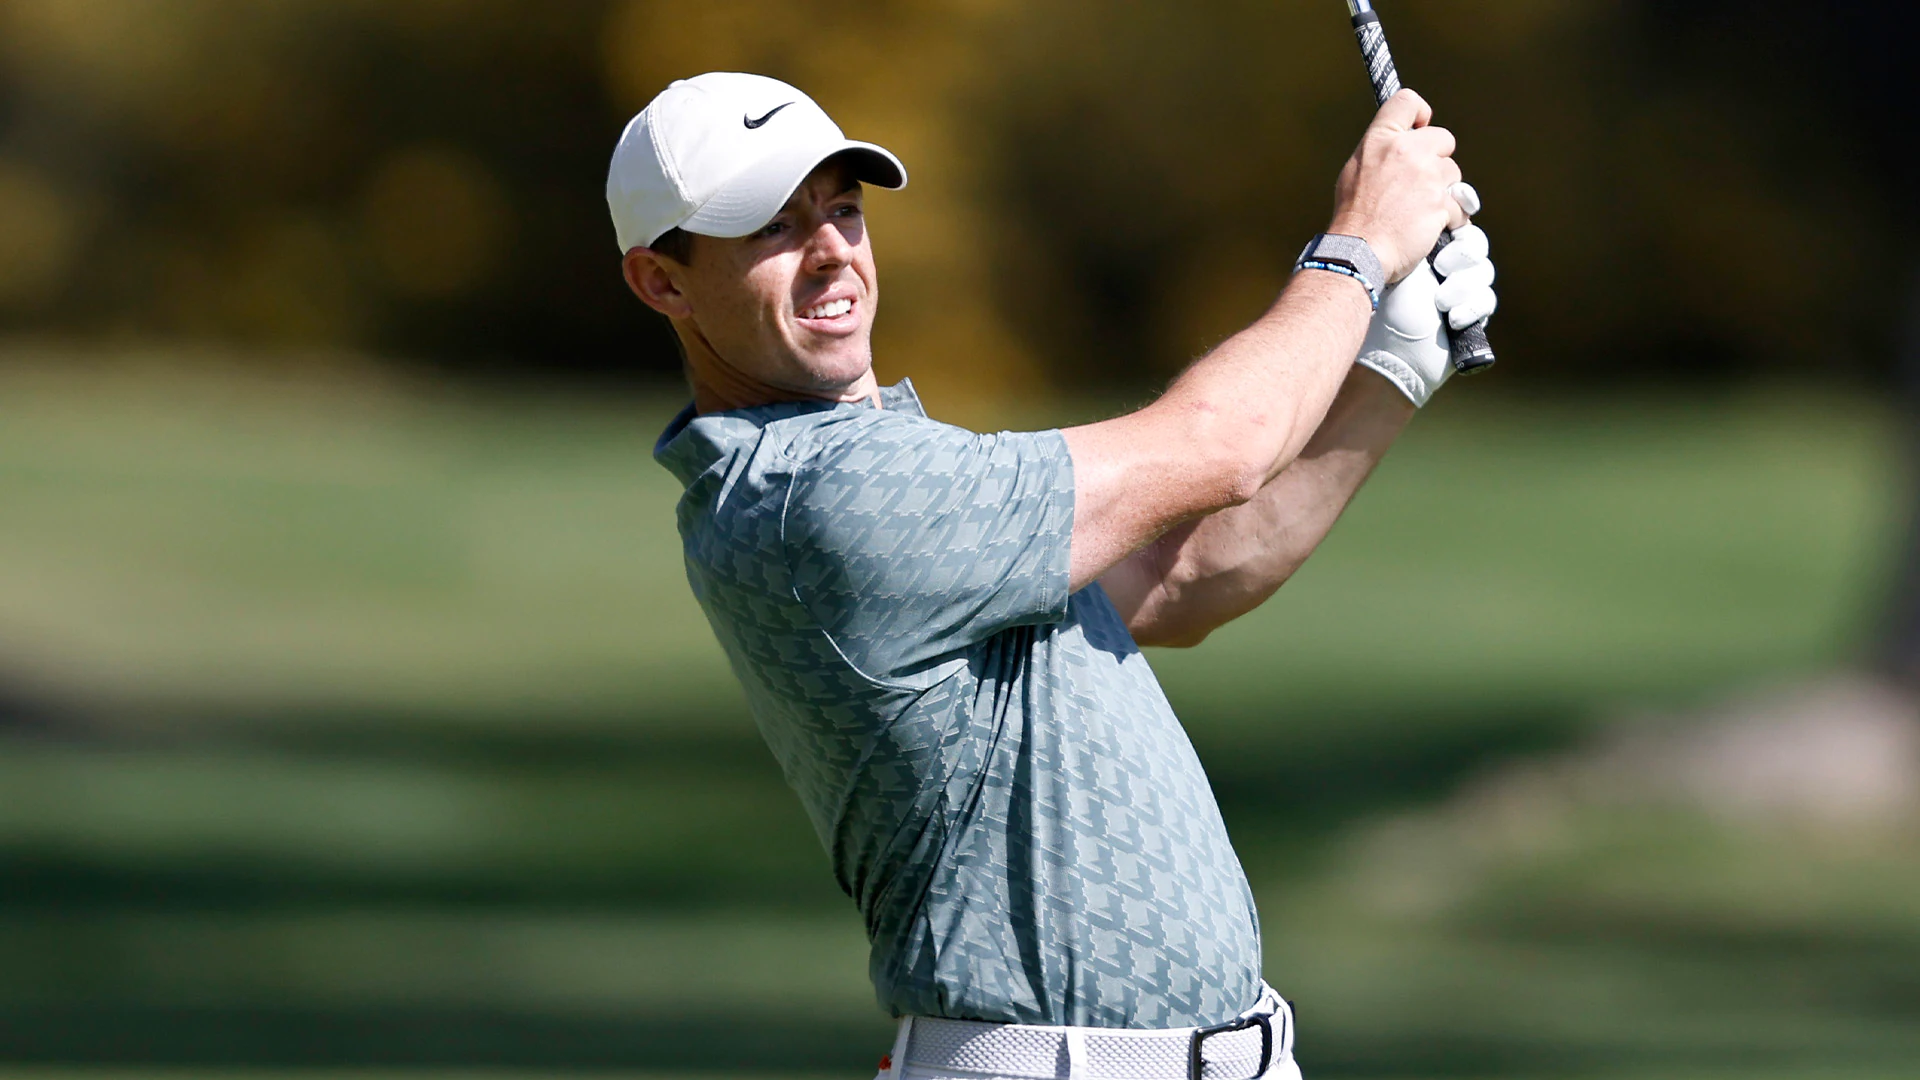 Rory McIlroy has many words for Phil Mickelson after controversial comments